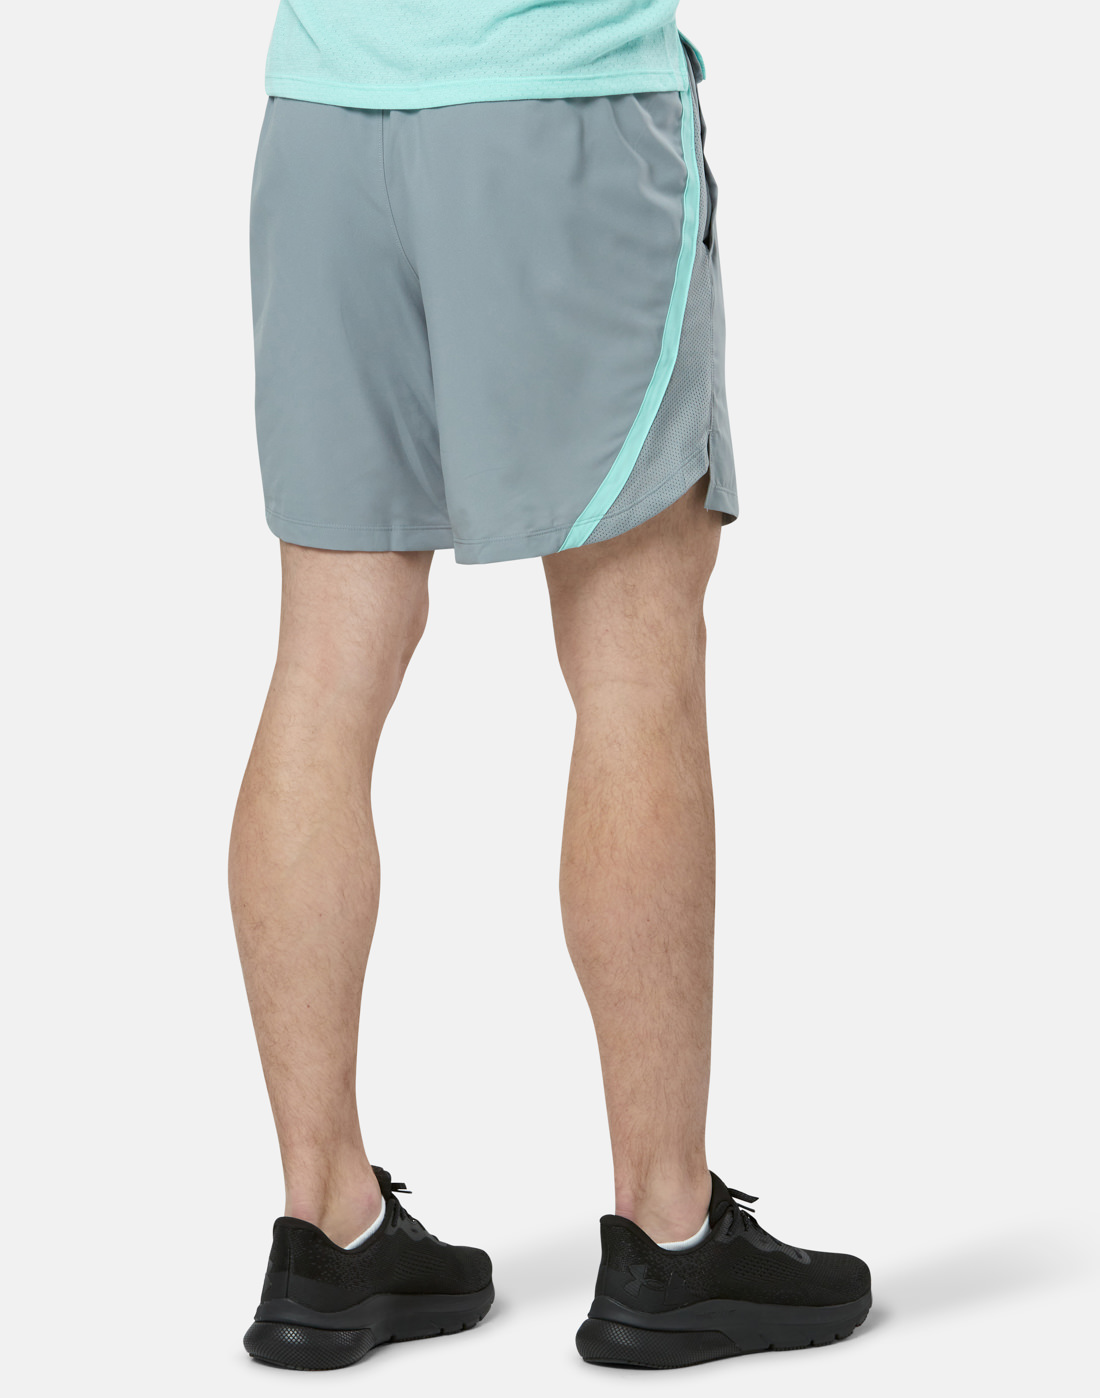 Under Armour Mens Launch 7 Inch Shorts - Grey | Life Style Sports UK